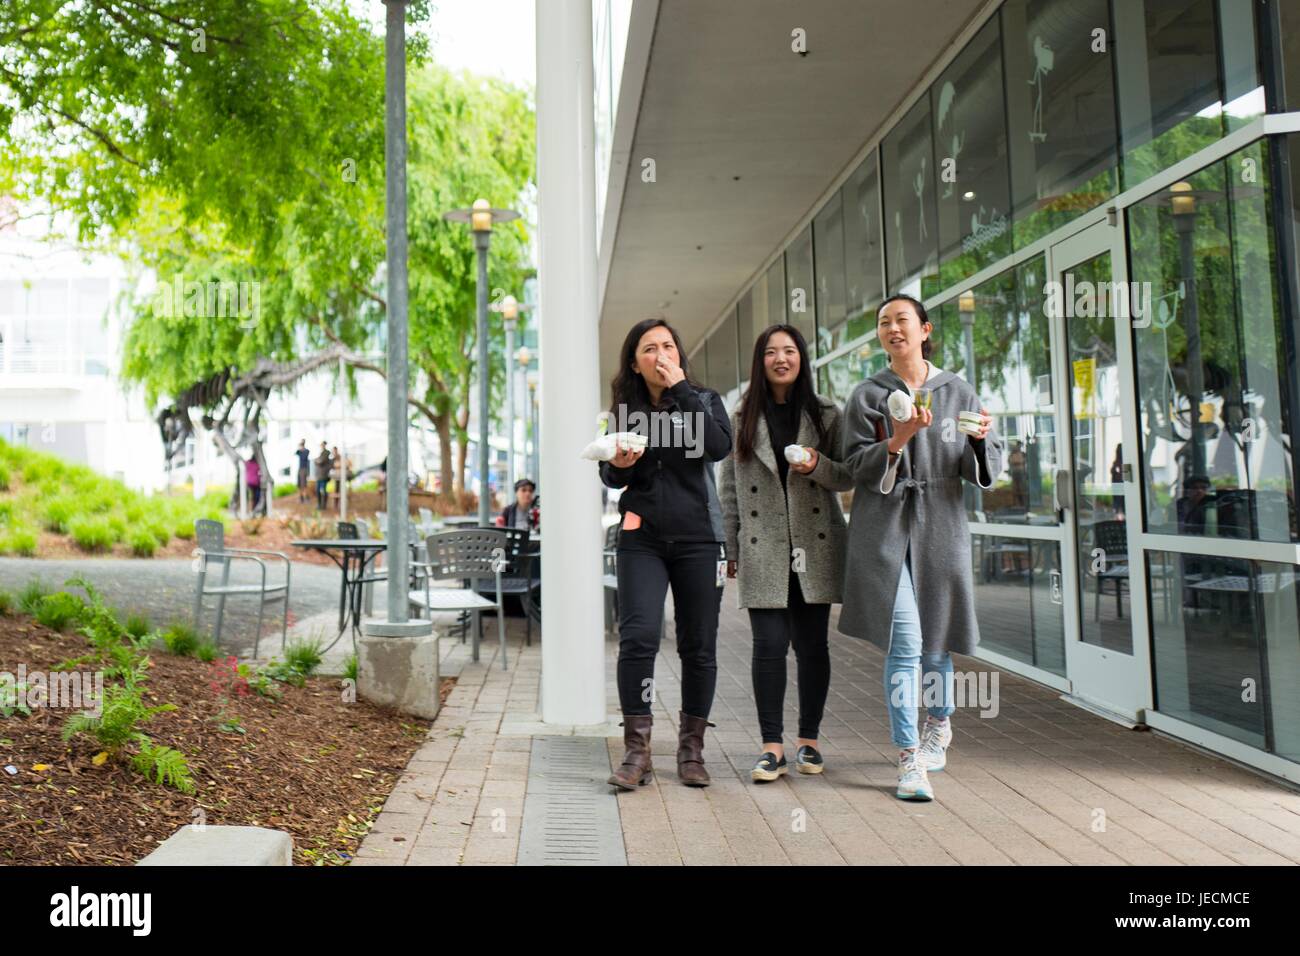 Three young, millennial age female tech workers walk and hold lunch foods at the Googleplex, headquarters of Google Inc in the Silicon Valley town of Mountain View, California, April 7, 2017. Diversity is a major topic in Silicon Valley, especially the inclusion of more women in technology jobs. Stock Photo